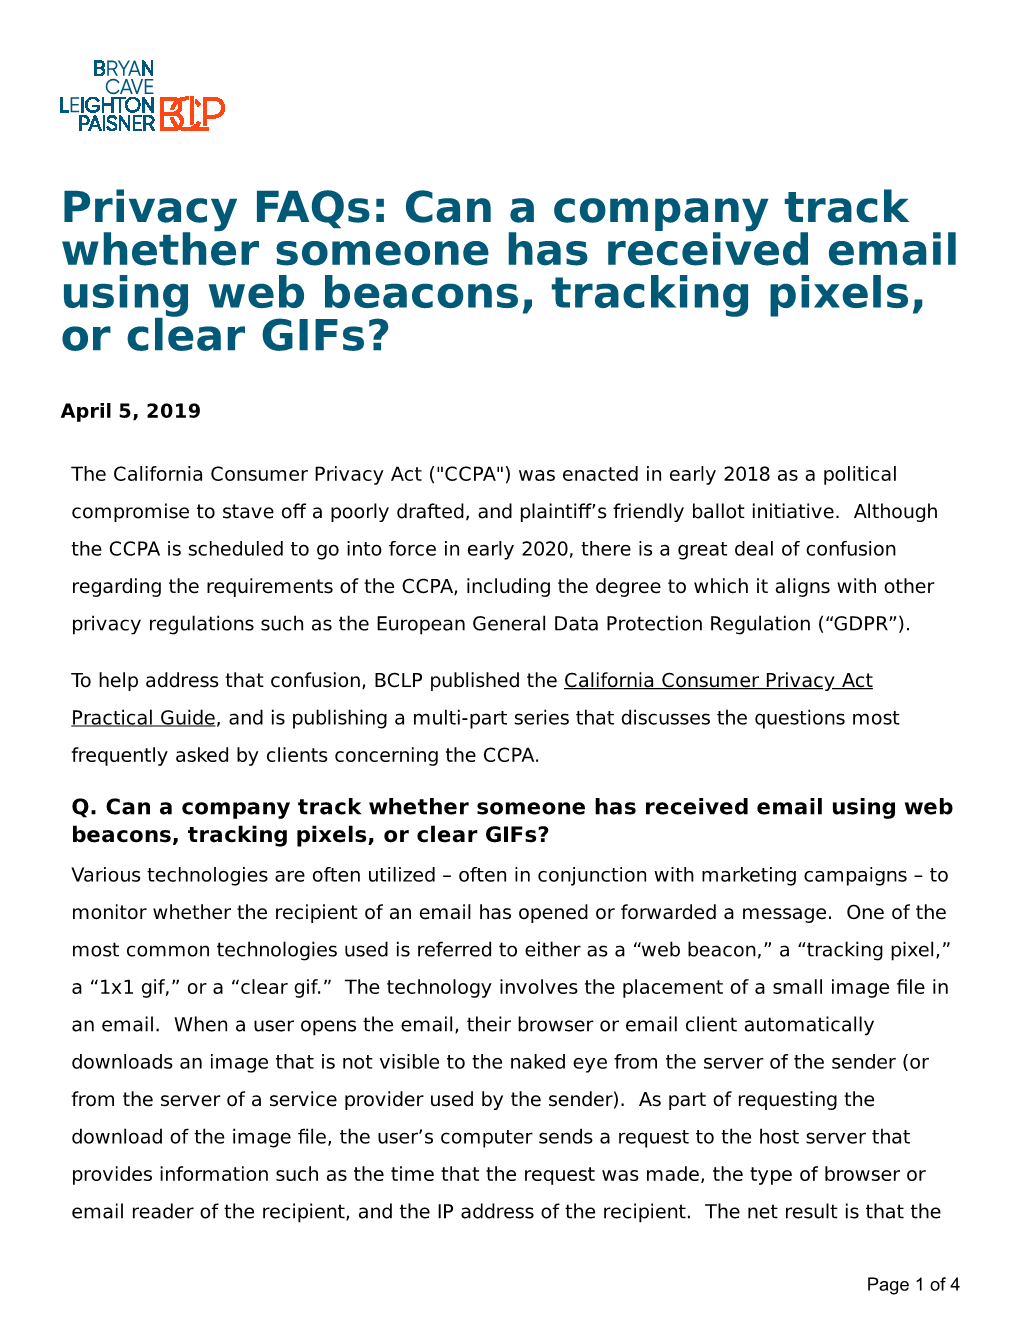 Privacy Faqs: Can a Company Track Whether Someone Has Received Email Using Web Beacons, Tracking Pixels, Or Clear Gifs?